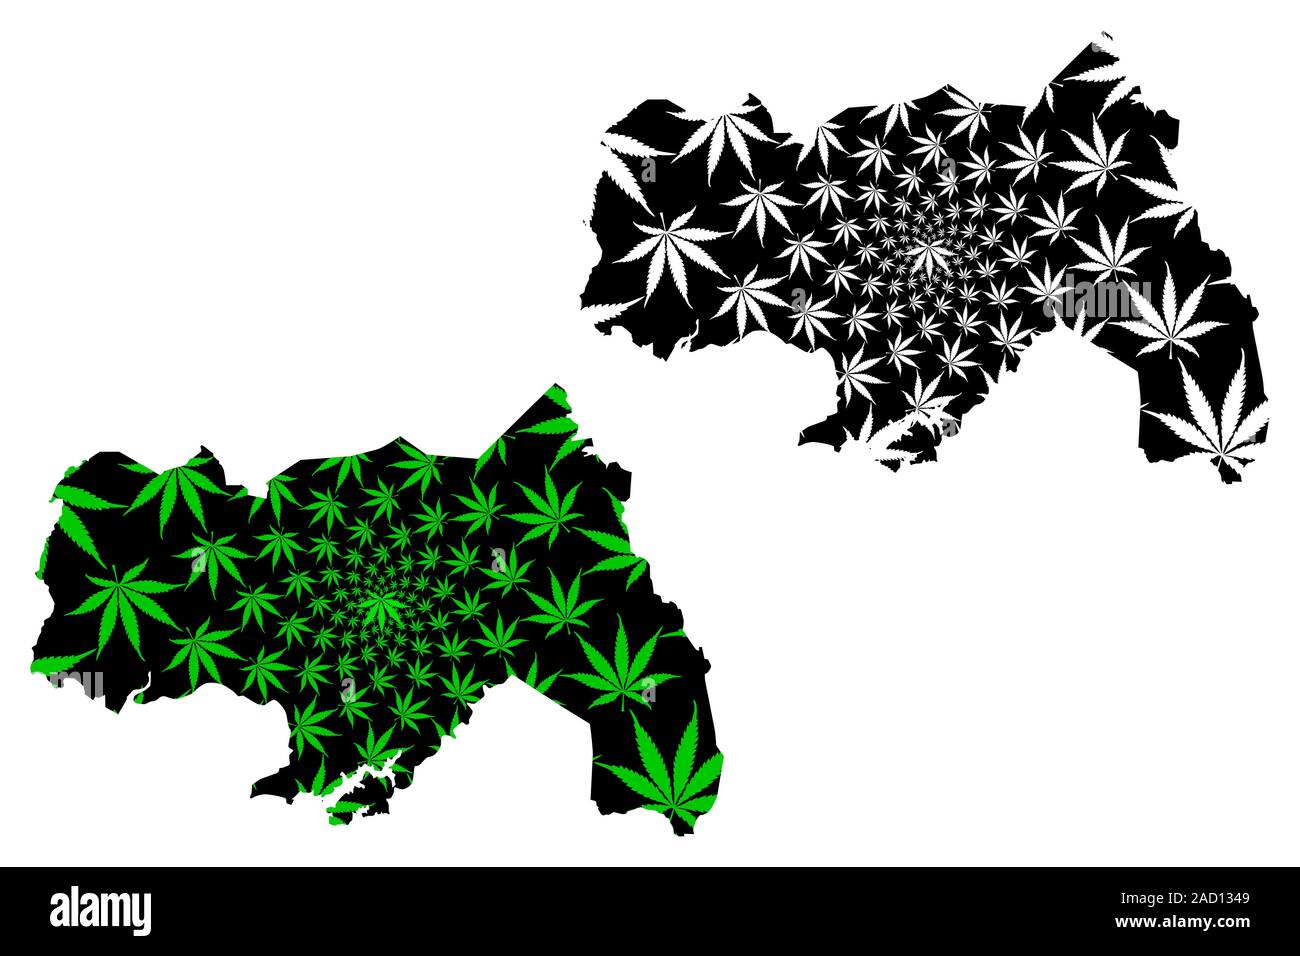 Northern Region (Regions of Uganda, Republic of Uganda, Administrative divisions) map is designed cannabis leaf green and black, Northern map made of Stock Vector